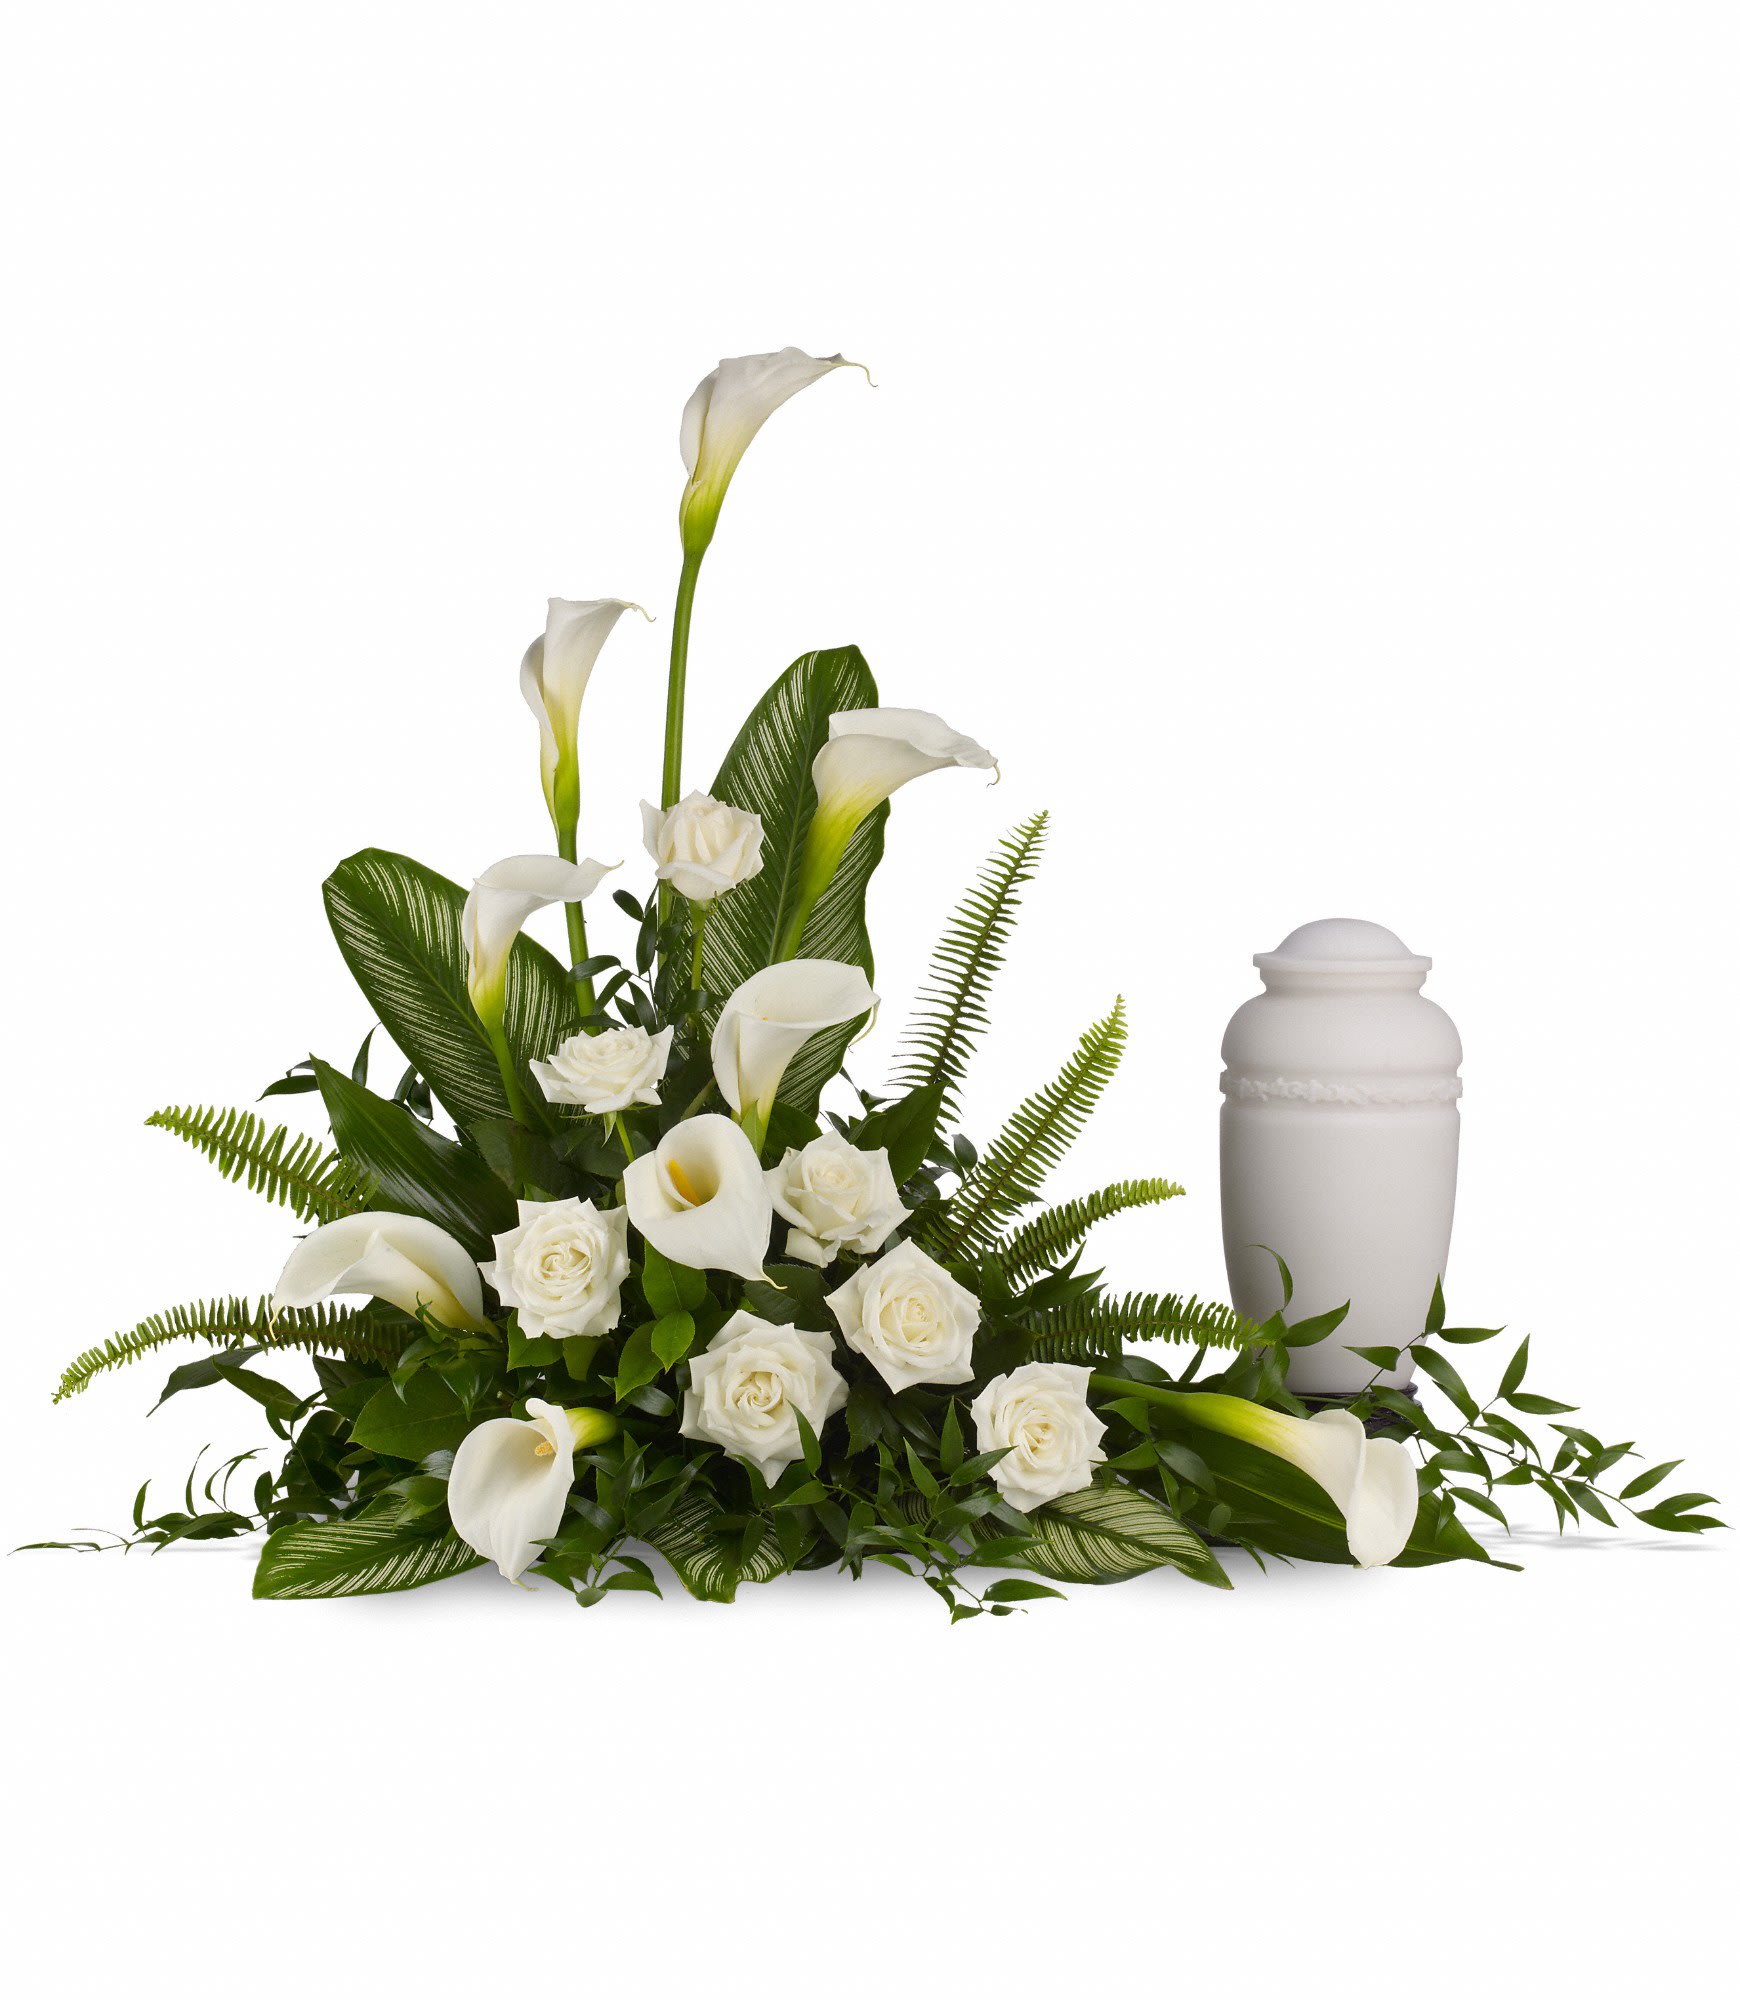 Stately Lilies - A calming portrait in ivory. Majestic calla lilies and stately white roses are framed by the lush leaves of aspidistra and calathea. Soft green sword fern adds to the soothing tones. 